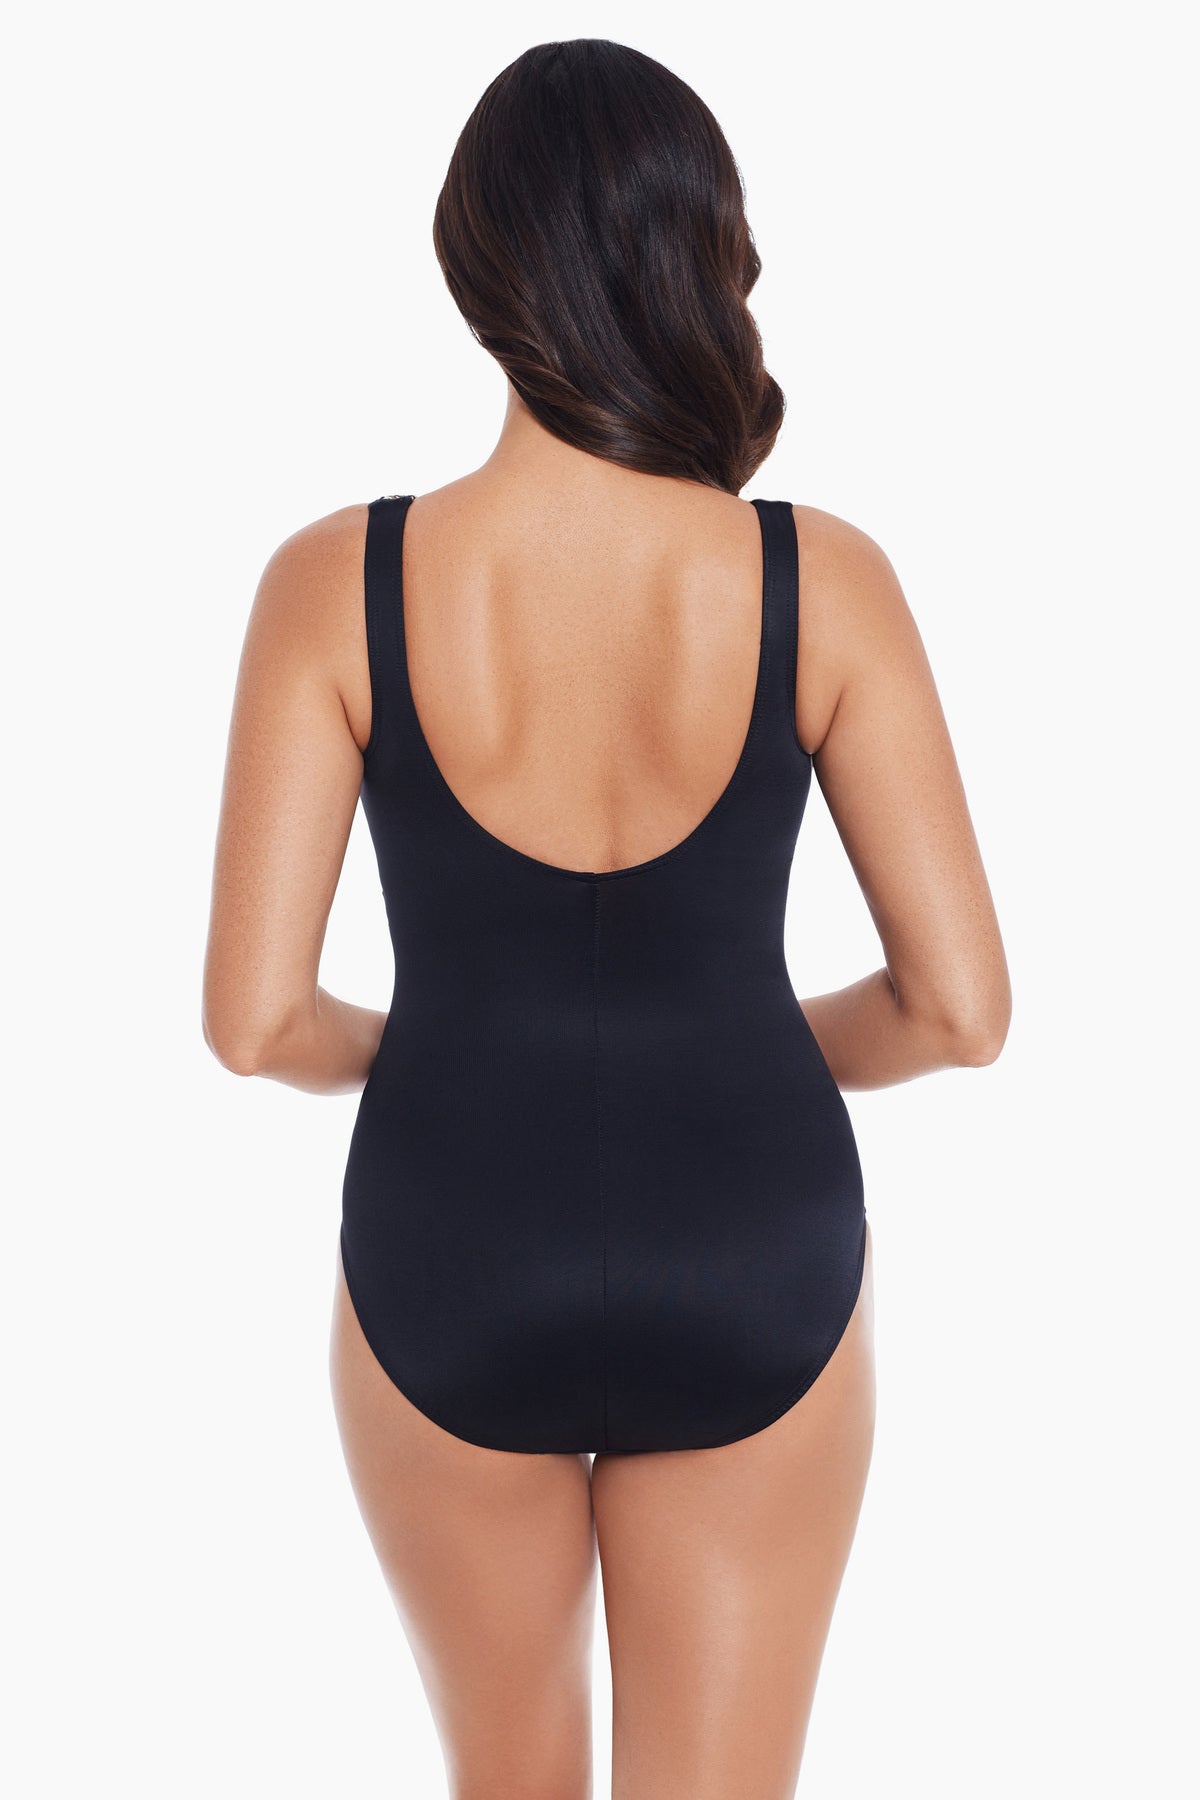 Miraclesuit Tigris It's A Wrap One Piece Swimsuit - Soma